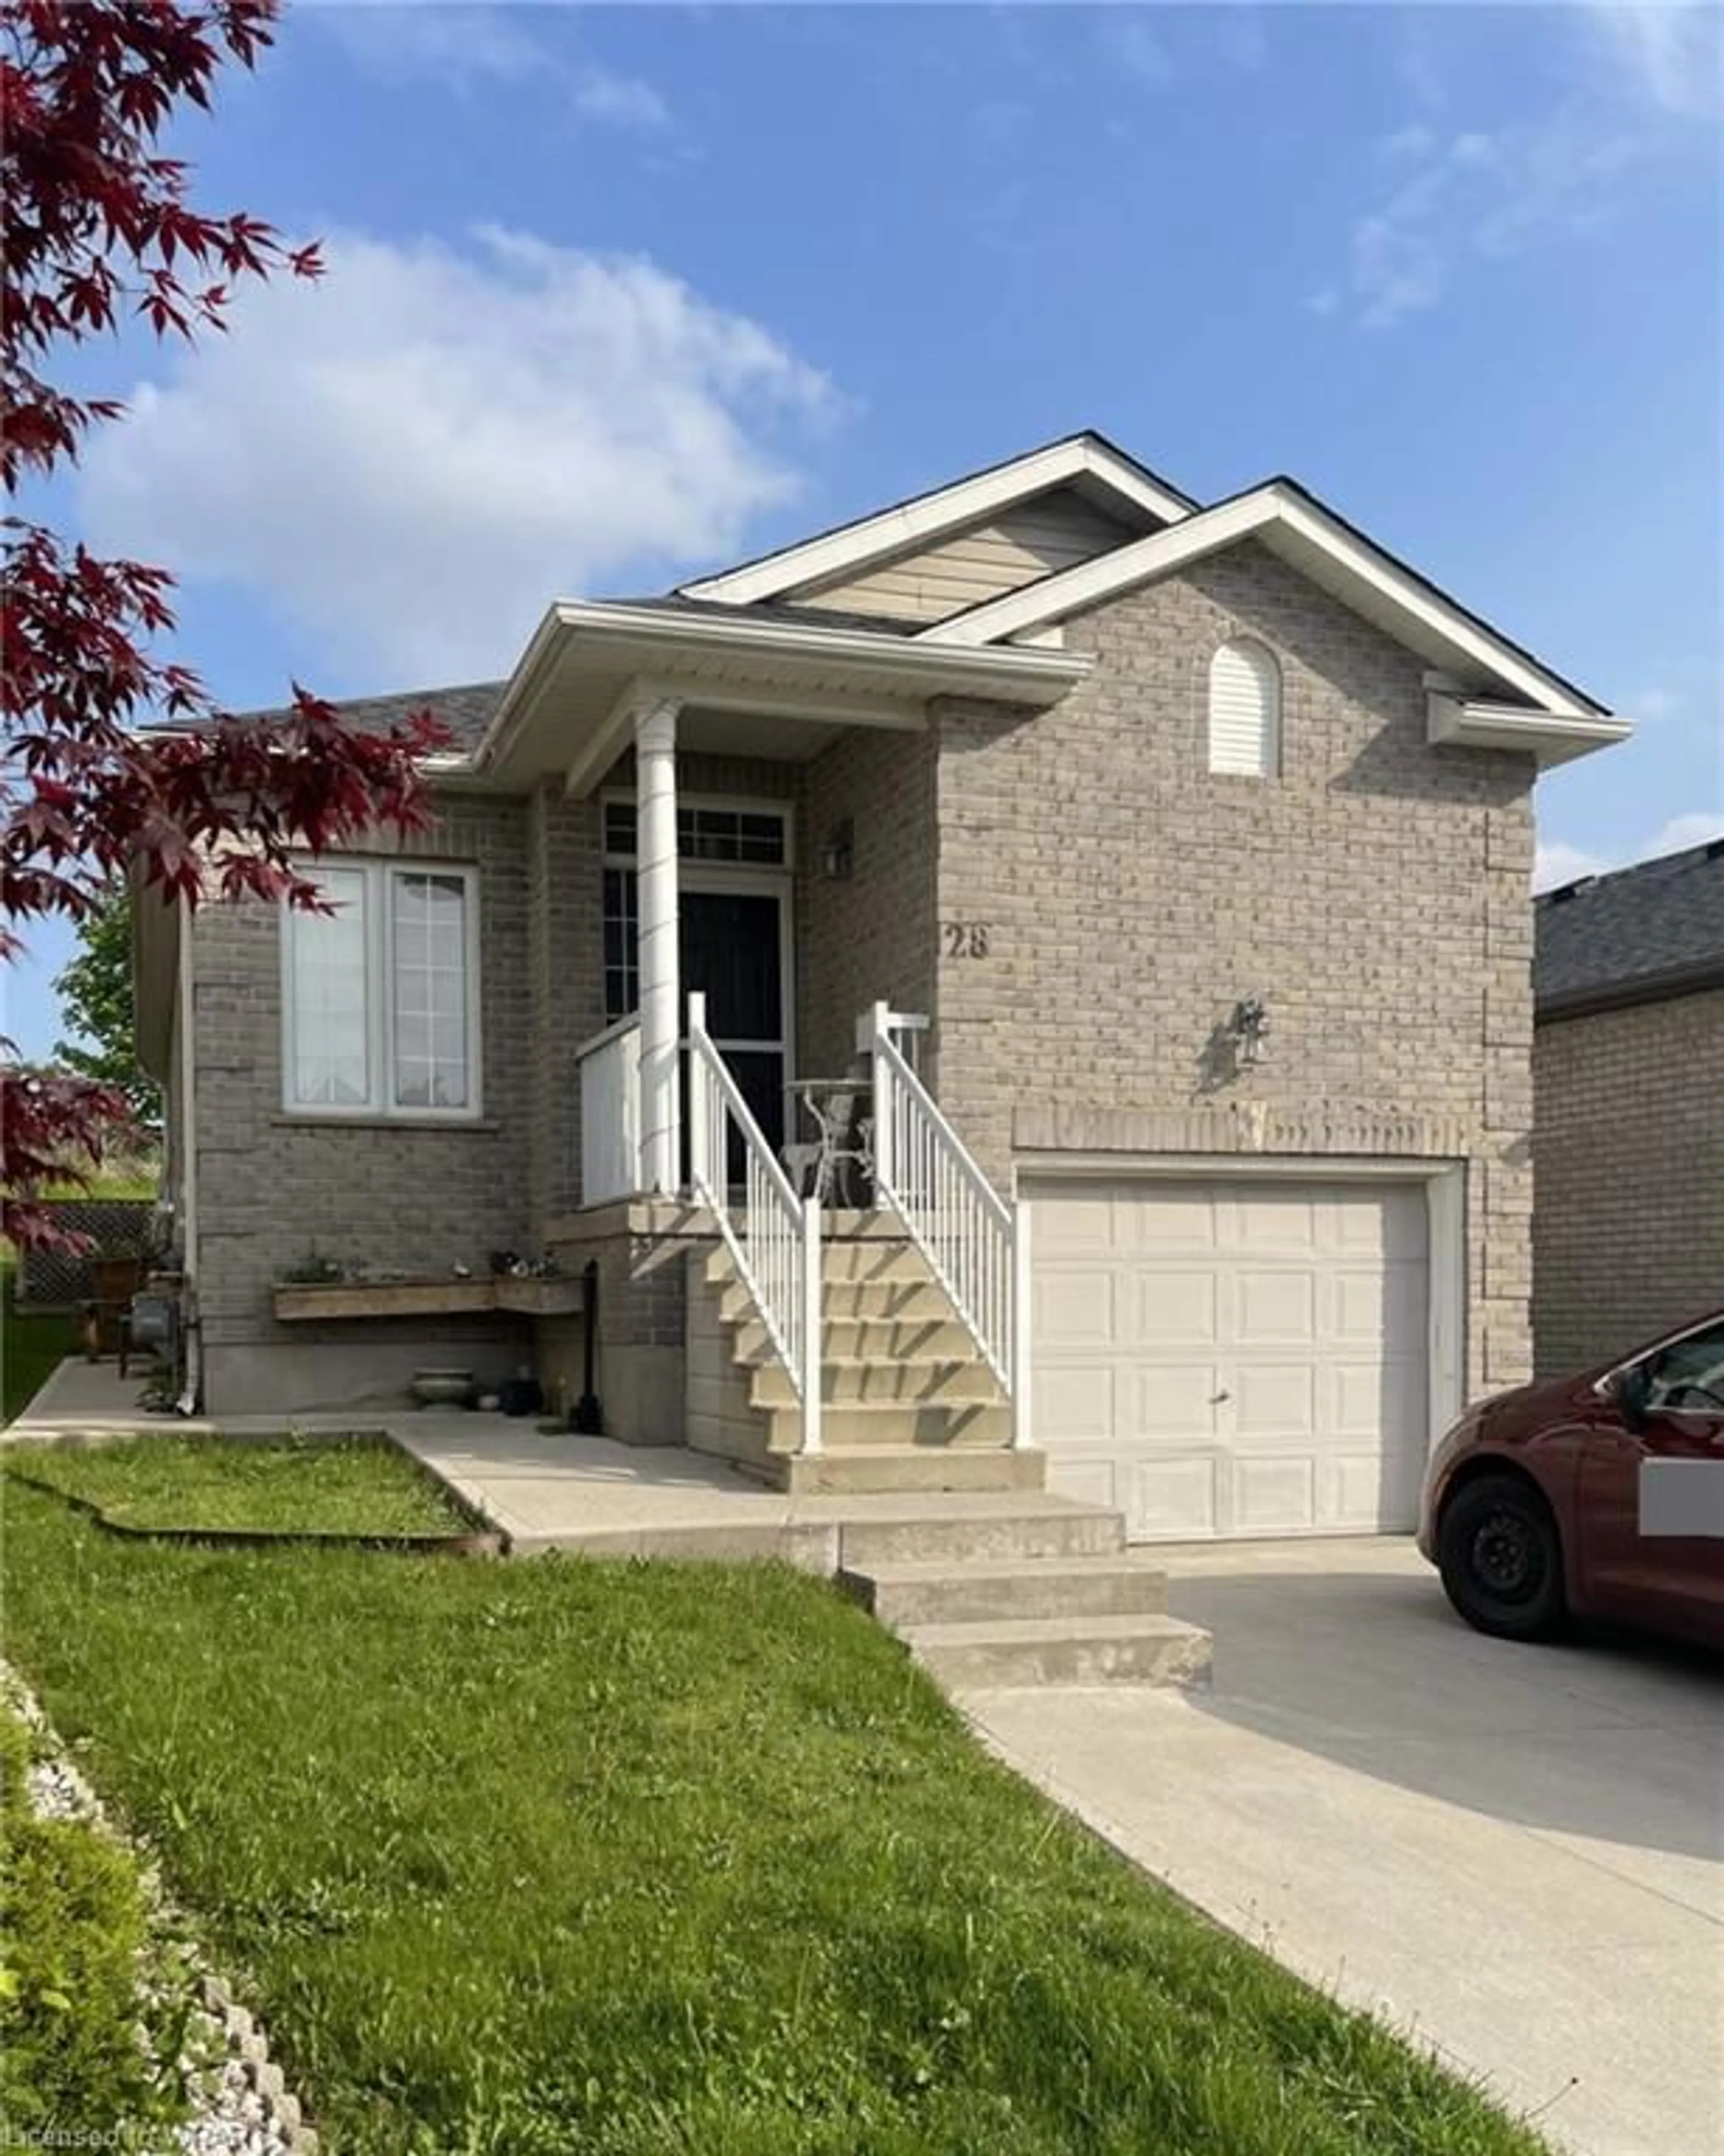 Home with brick exterior material for 28 Lena Cres, Cambridge Ontario N1R 8P4